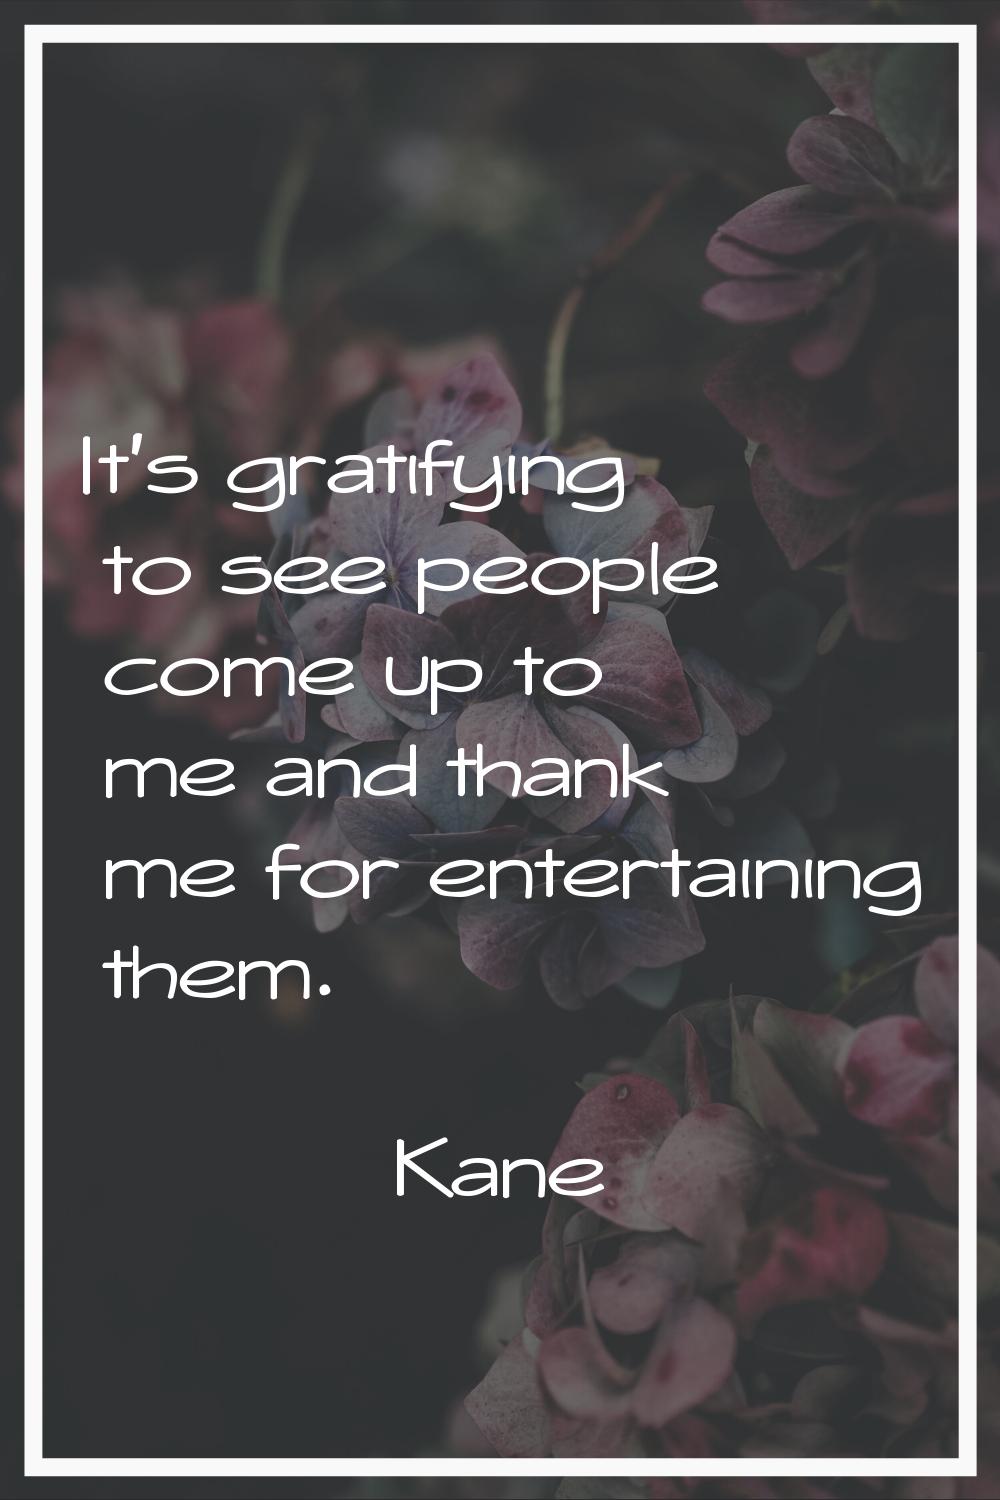 It's gratifying to see people come up to me and thank me for entertaining them.